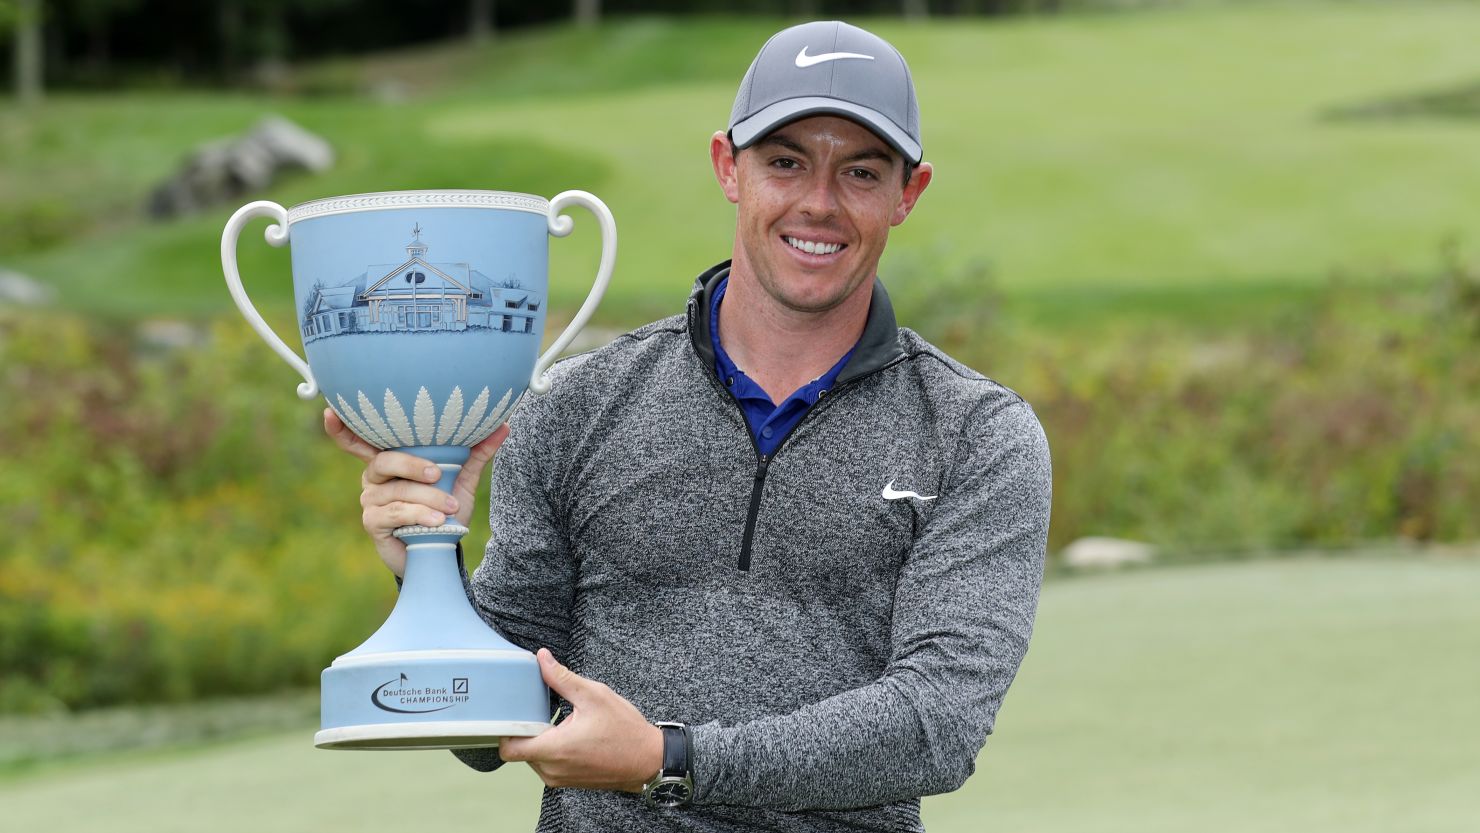 Rory McIlroy won the Deutsche Bank Championship for the second time, following up his 2012 success.